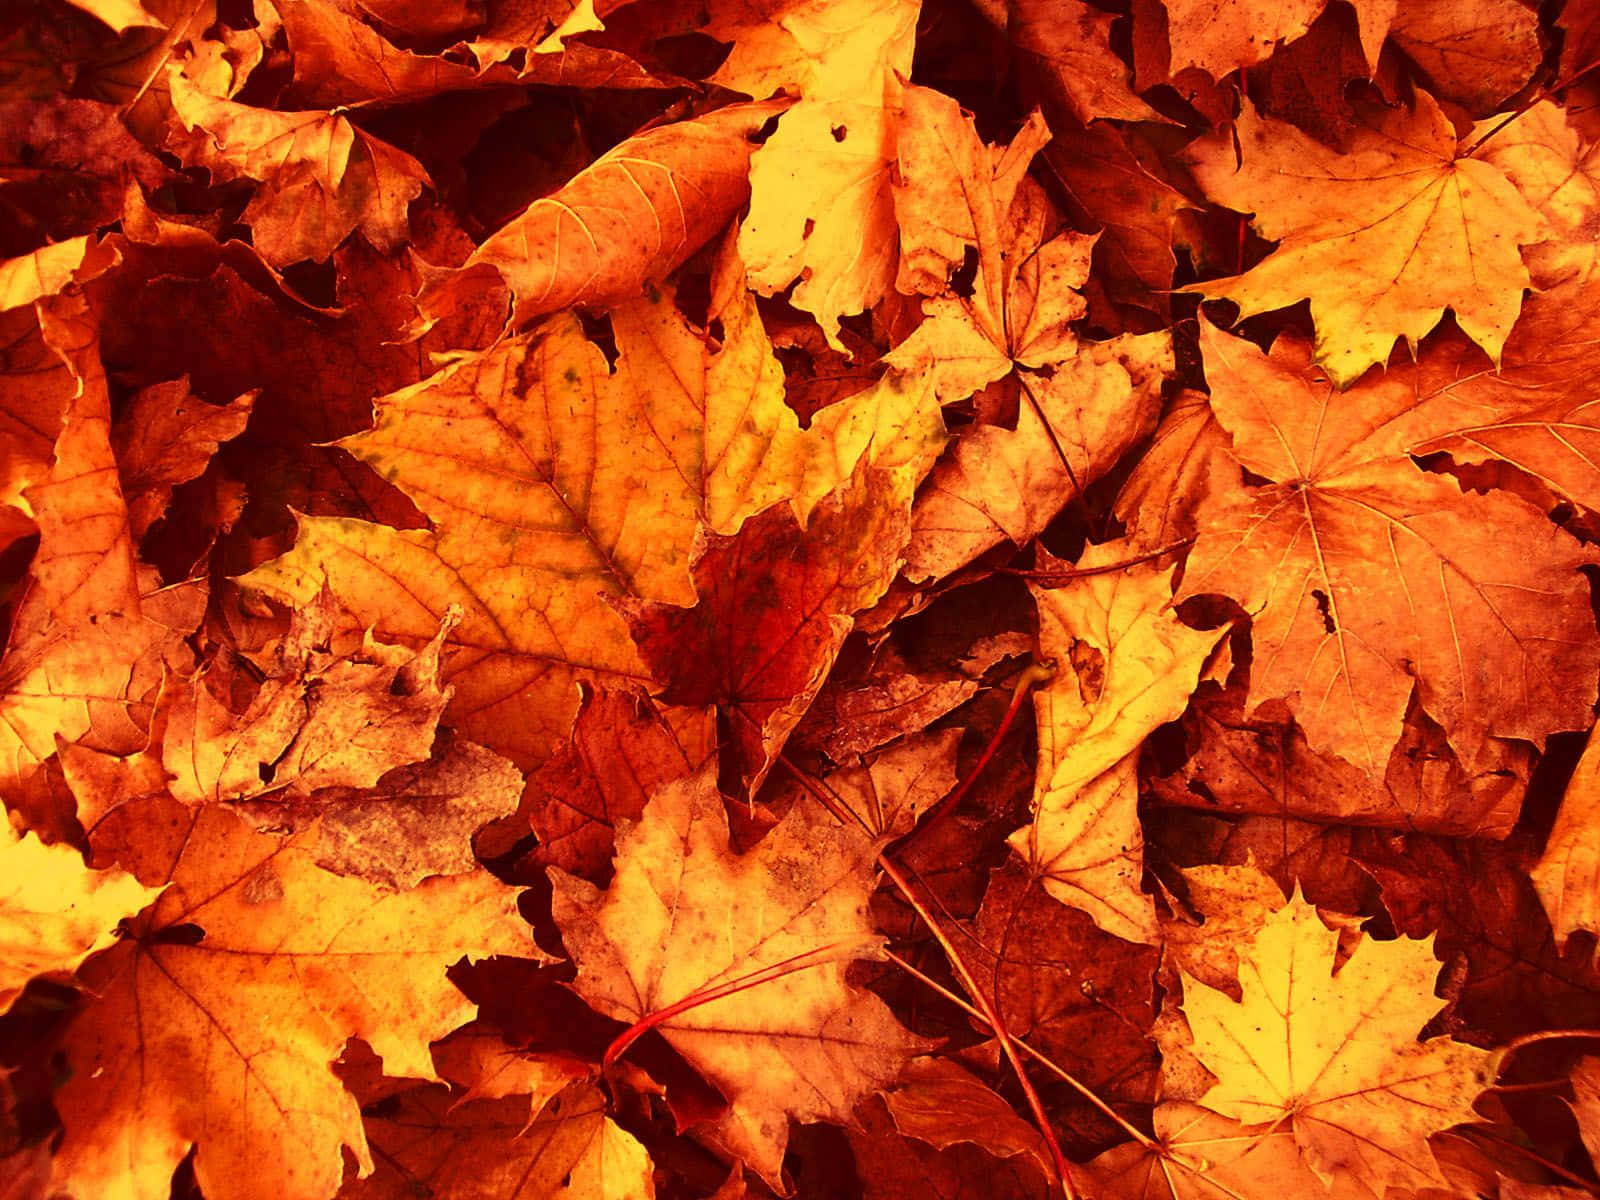 Cute Leaves Dried And Orange Maple Leaves Wallpaper